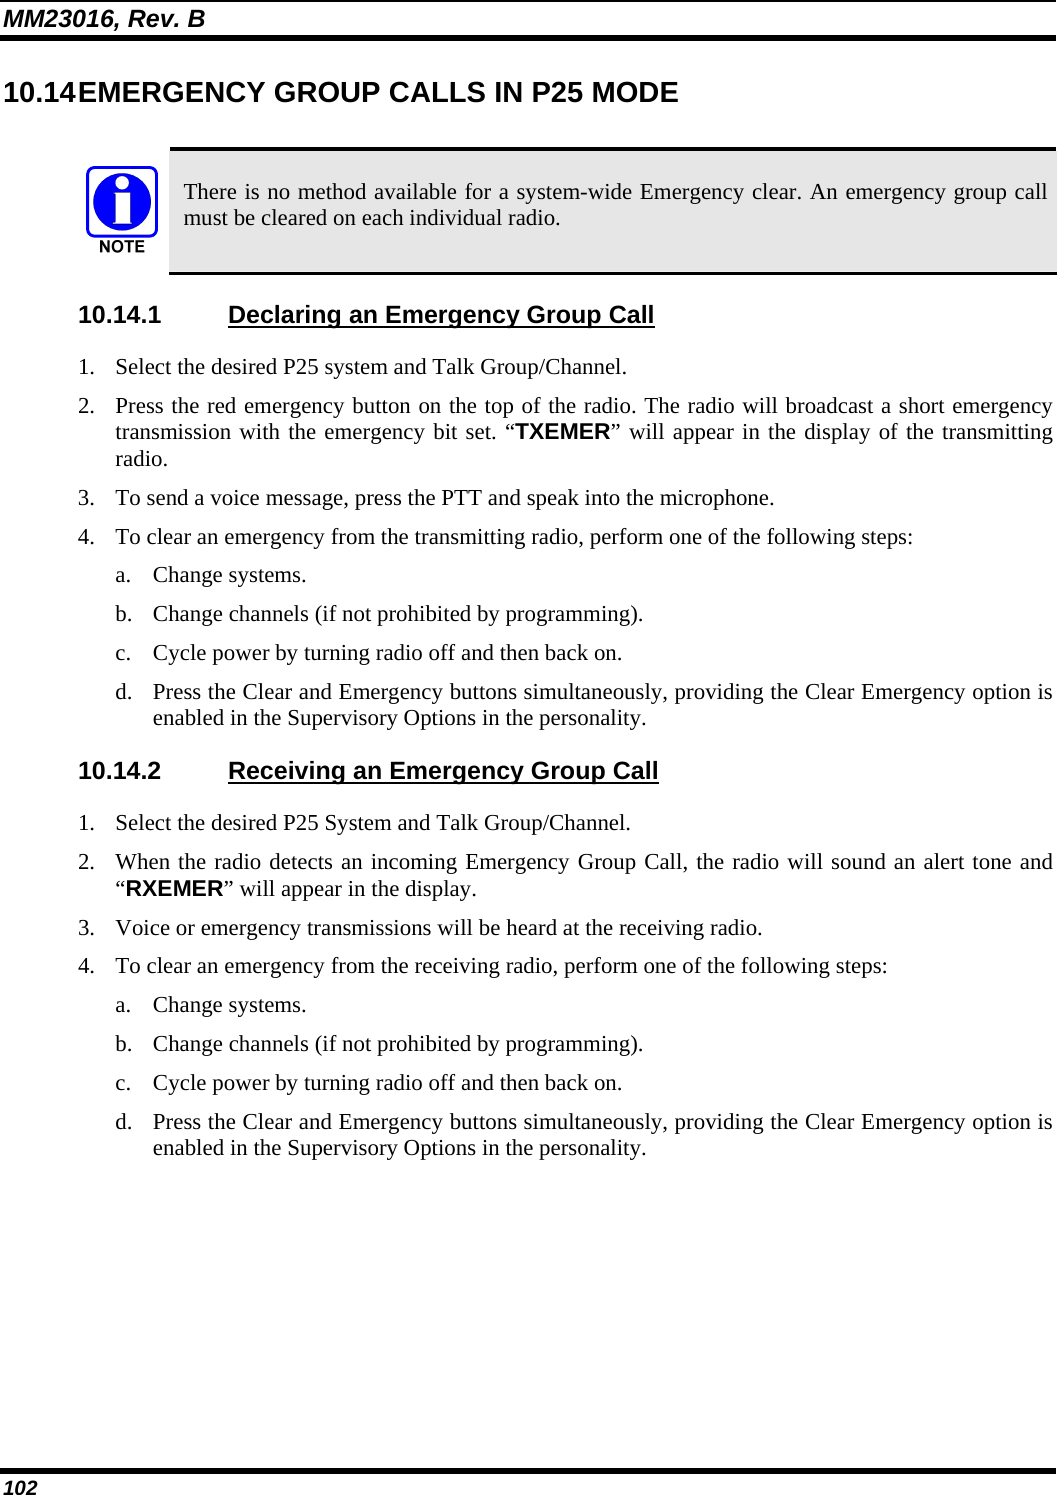 MM23016, Rev. B 102 10.14 EMERGENCY  GROUP  CALLS IN P25 MODE   There is no method available for a system-wide Emergency clear. An emergency group call must be cleared on each individual radio. 10.14.1  Declaring an Emergency Group Call 1. Select the desired P25 system and Talk Group/Channel. 2. Press the red emergency button on the top of the radio. The radio will broadcast a short emergency transmission with the emergency bit set. “TXEMER” will appear in the display of the transmitting radio. 3. To send a voice message, press the PTT and speak into the microphone. 4. To clear an emergency from the transmitting radio, perform one of the following steps: a. Change systems. b. Change channels (if not prohibited by programming). c. Cycle power by turning radio off and then back on. d. Press the Clear and Emergency buttons simultaneously, providing the Clear Emergency option is enabled in the Supervisory Options in the personality. 10.14.2  Receiving an Emergency Group Call 1. Select the desired P25 System and Talk Group/Channel. 2. When the radio detects an incoming Emergency Group Call, the radio will sound an alert tone and “RXEMER” will appear in the display. 3. Voice or emergency transmissions will be heard at the receiving radio. 4. To clear an emergency from the receiving radio, perform one of the following steps: a. Change systems. b. Change channels (if not prohibited by programming). c. Cycle power by turning radio off and then back on.  d. Press the Clear and Emergency buttons simultaneously, providing the Clear Emergency option is enabled in the Supervisory Options in the personality. 